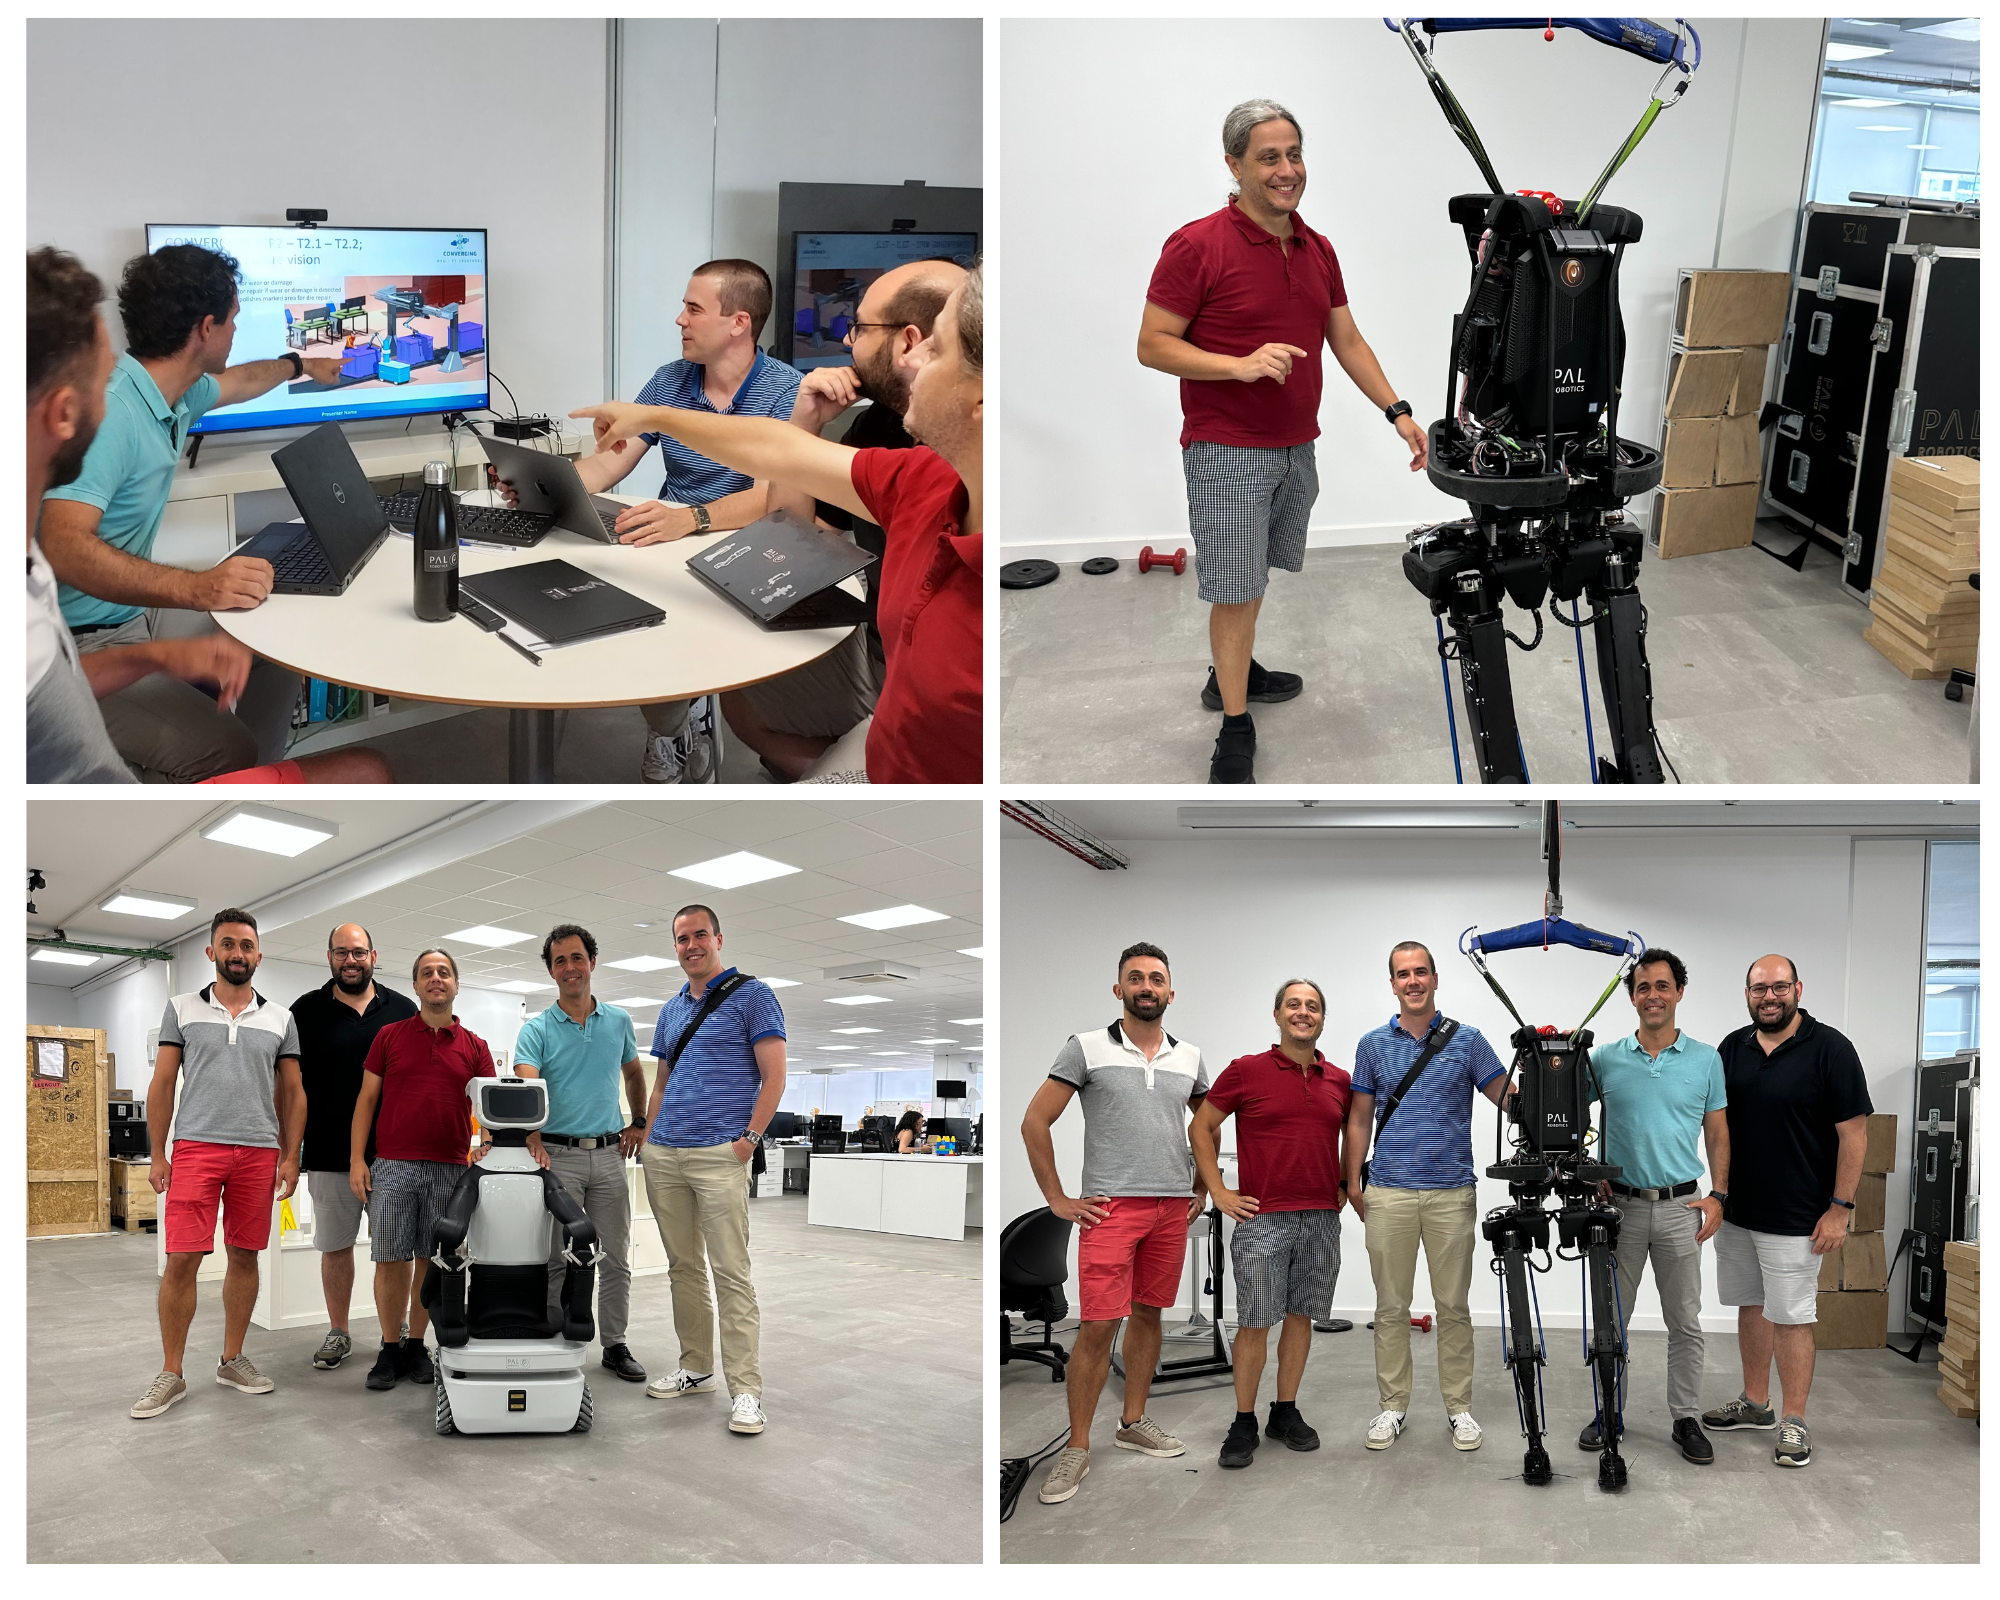 A Promising Visit to PAL Robotics: A Glimpse into the Future of Innovation